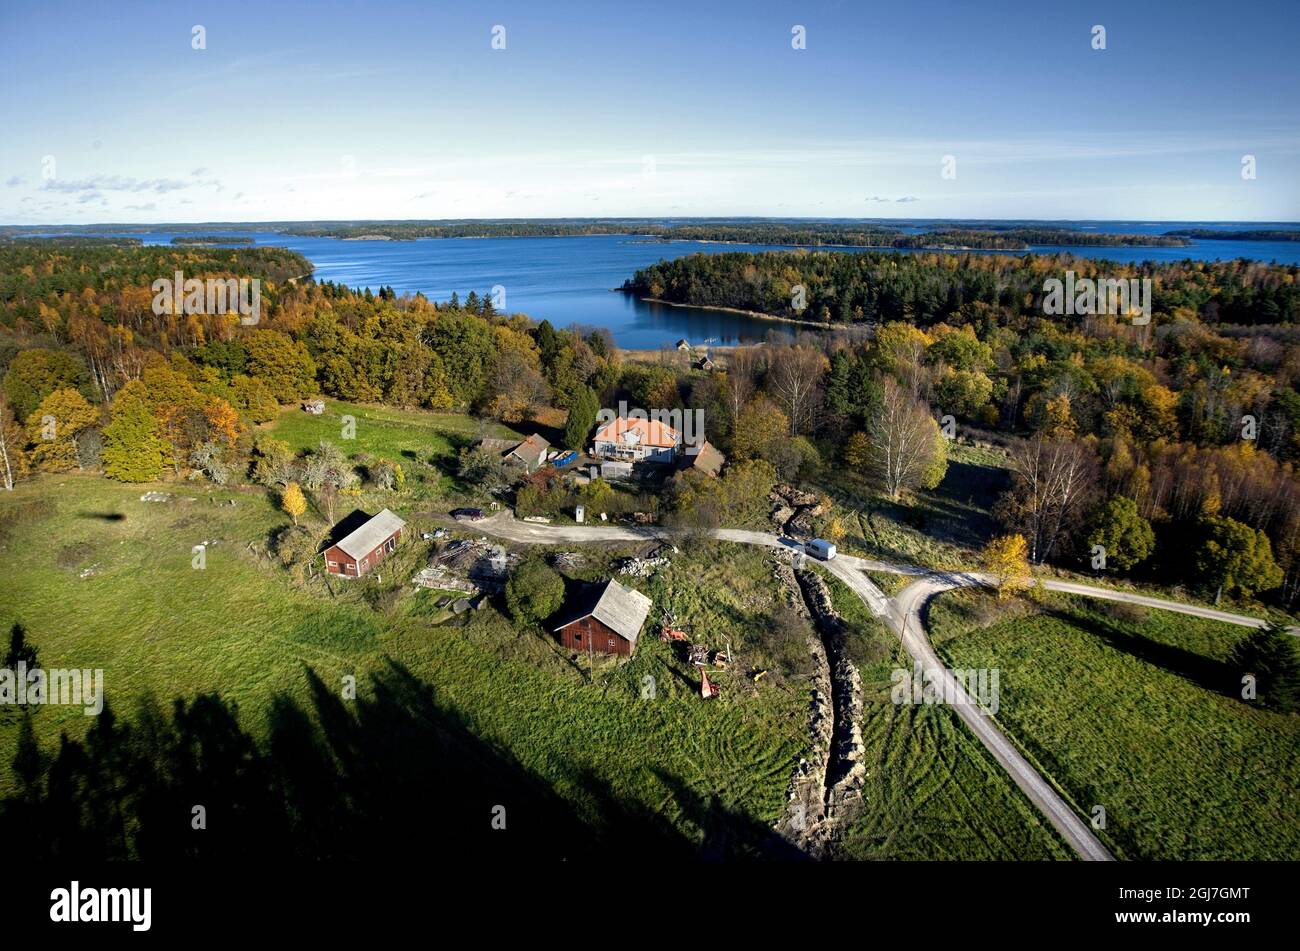 STOCKHOLM 20120917 An aeriasl view over Prince Carl Philip´s farming estate  a couple of kilometer south of Stockholm, Sweden. The Prince inherited the approximately 90 acres of forest and farmland from a retired naval officer couple of years ago, according to newspaper Expressen. Prince Carl Philip has filed for permission to build a sauna and spa building near the lake.   Against some of his neighbors’ whishes Foto: Joakim Berglund / XP / SCANPIX / Kod: 7102 ** OUT SWEDEN OUT T ** Stock Photo